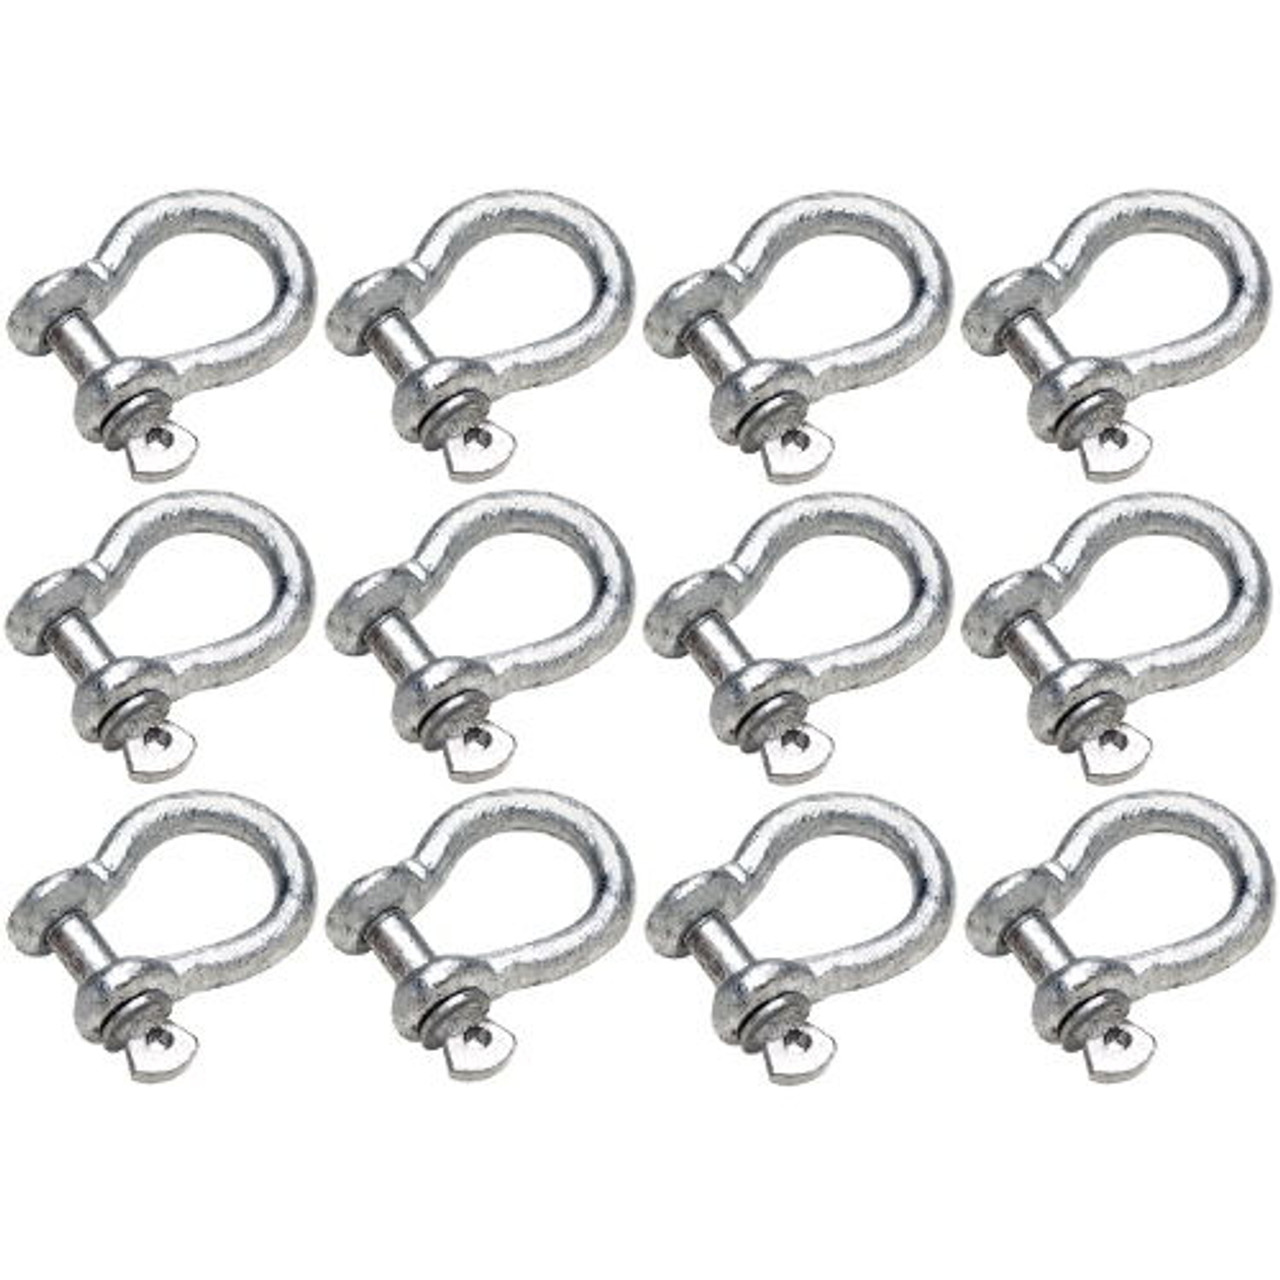 12 Pack of 7/16 Inch Galvanized Anchor Shackles - 13,200 lbs Breaking Strength